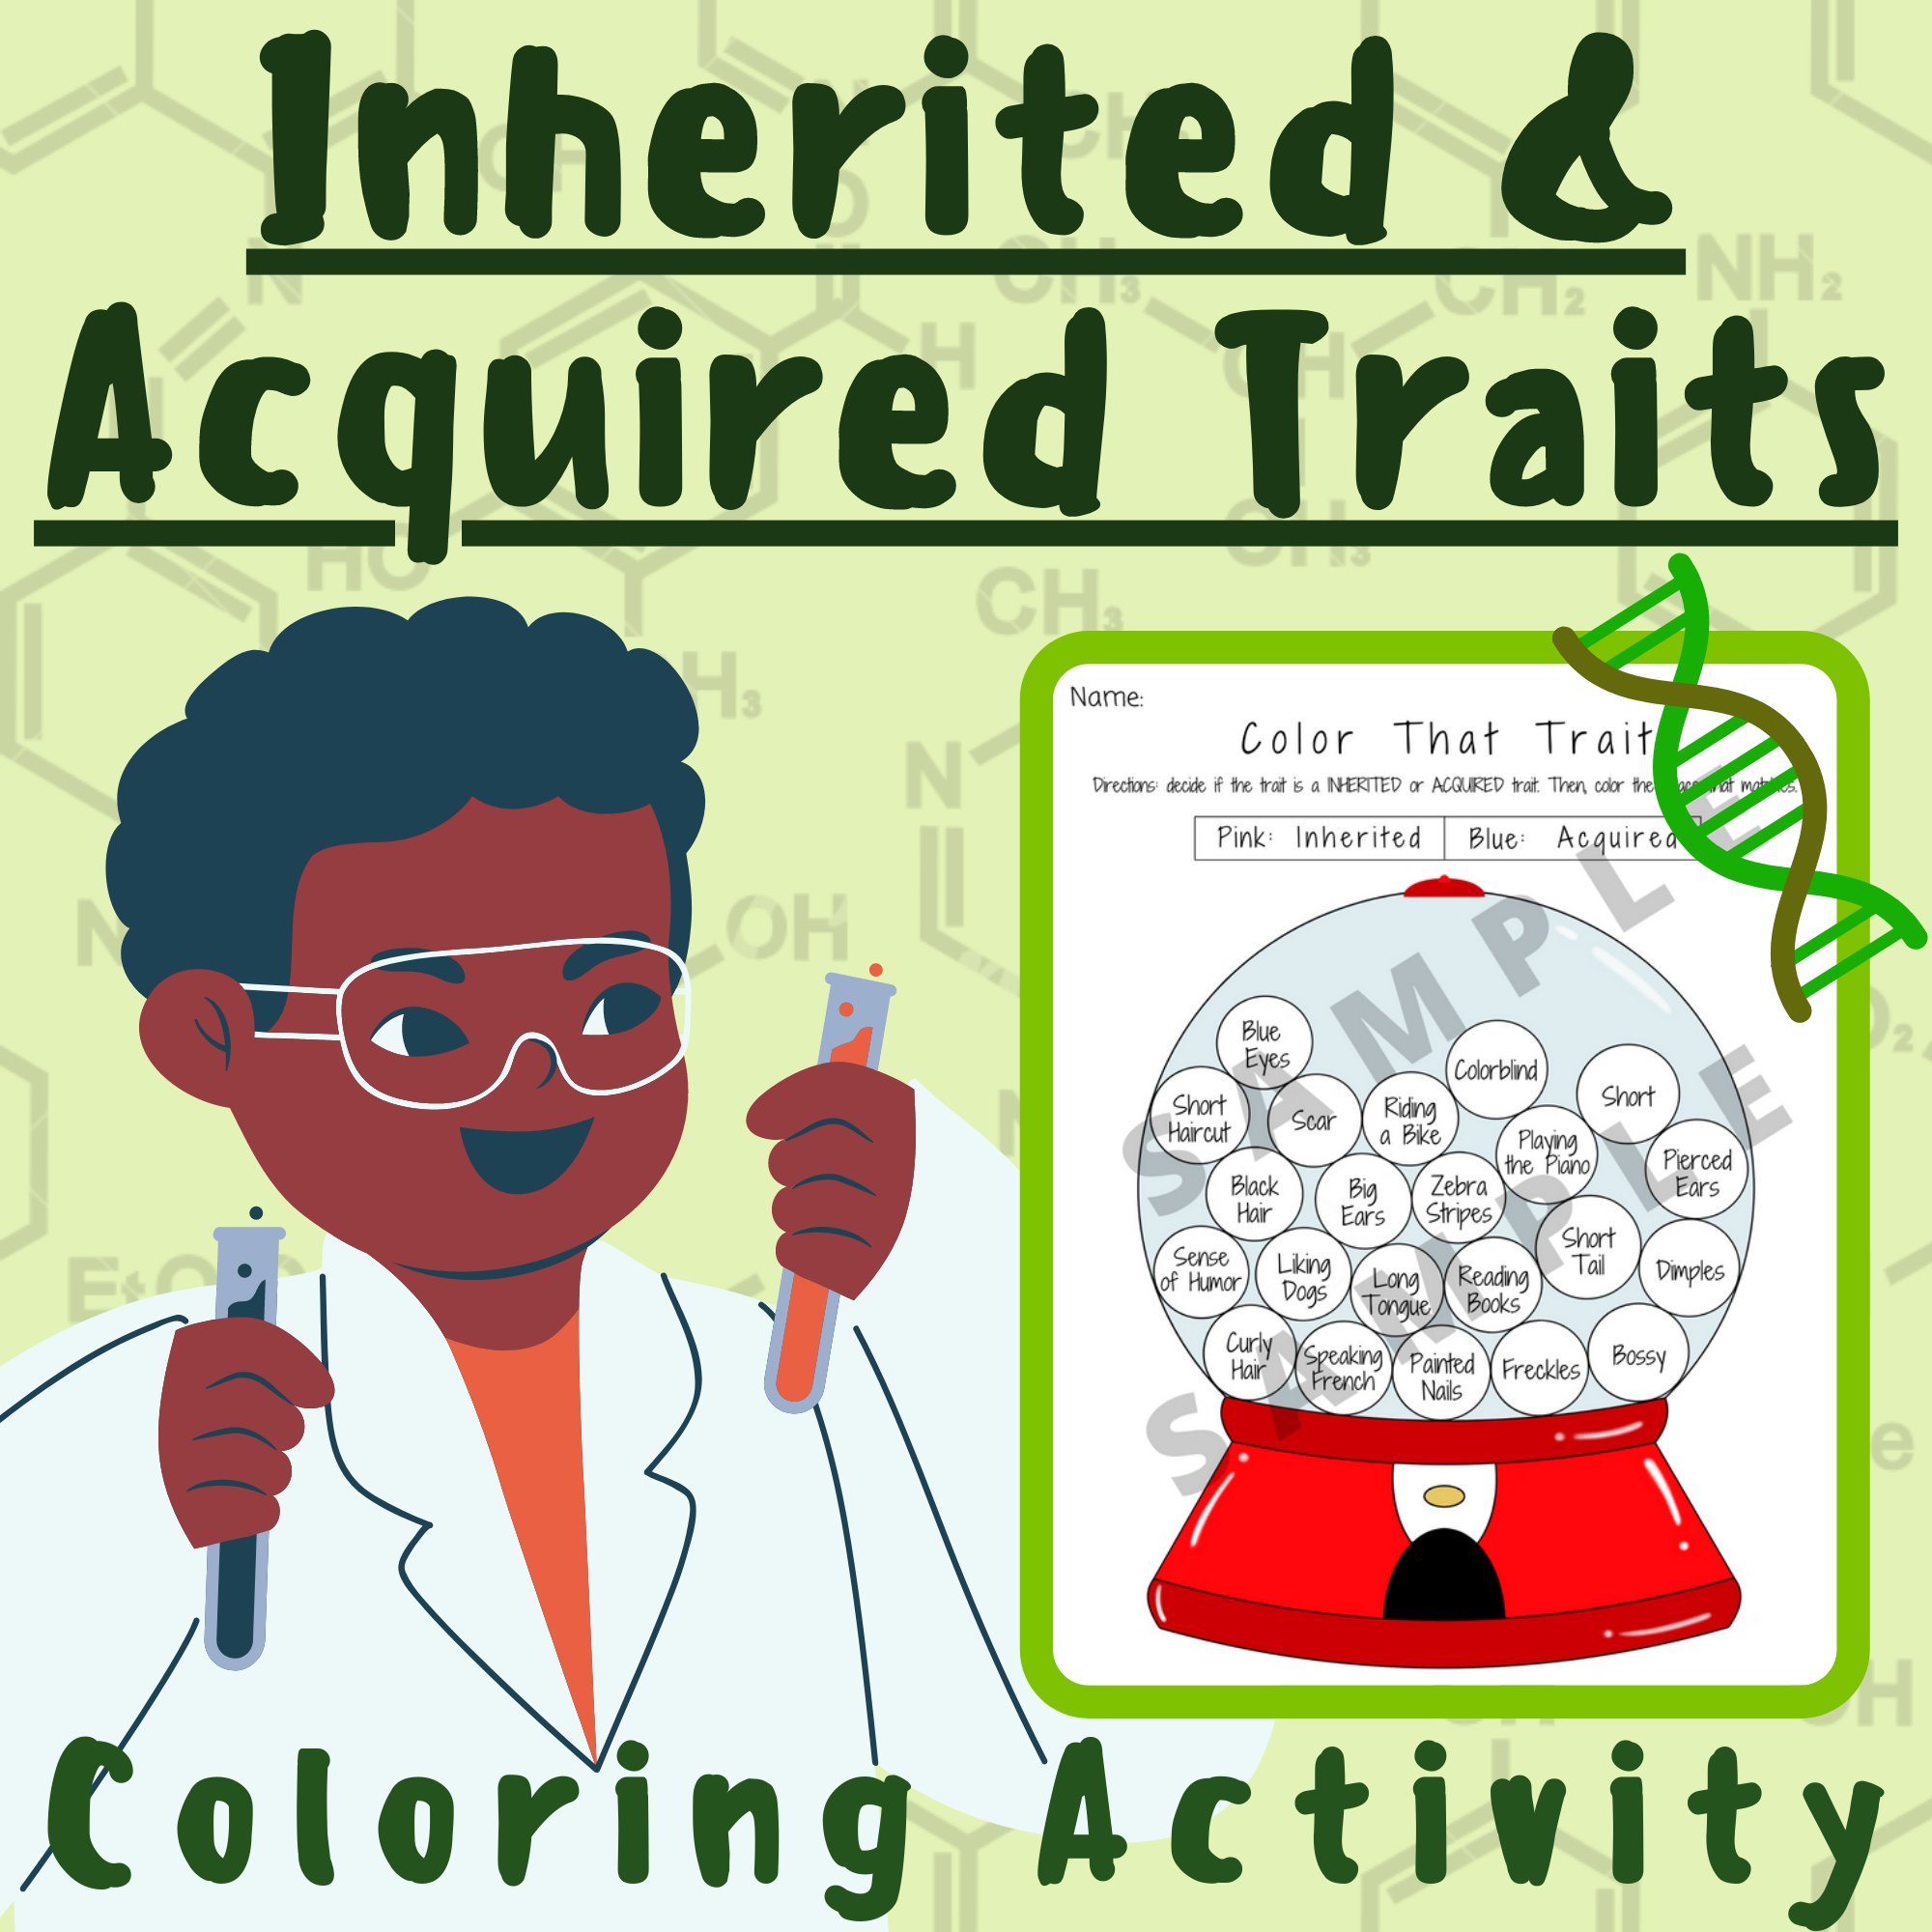 Heredity Inherited and Acquired Traits Coloring Activity Worksheet; For K-12 Teachers and Students in the Science and Biology Classroom's featured image